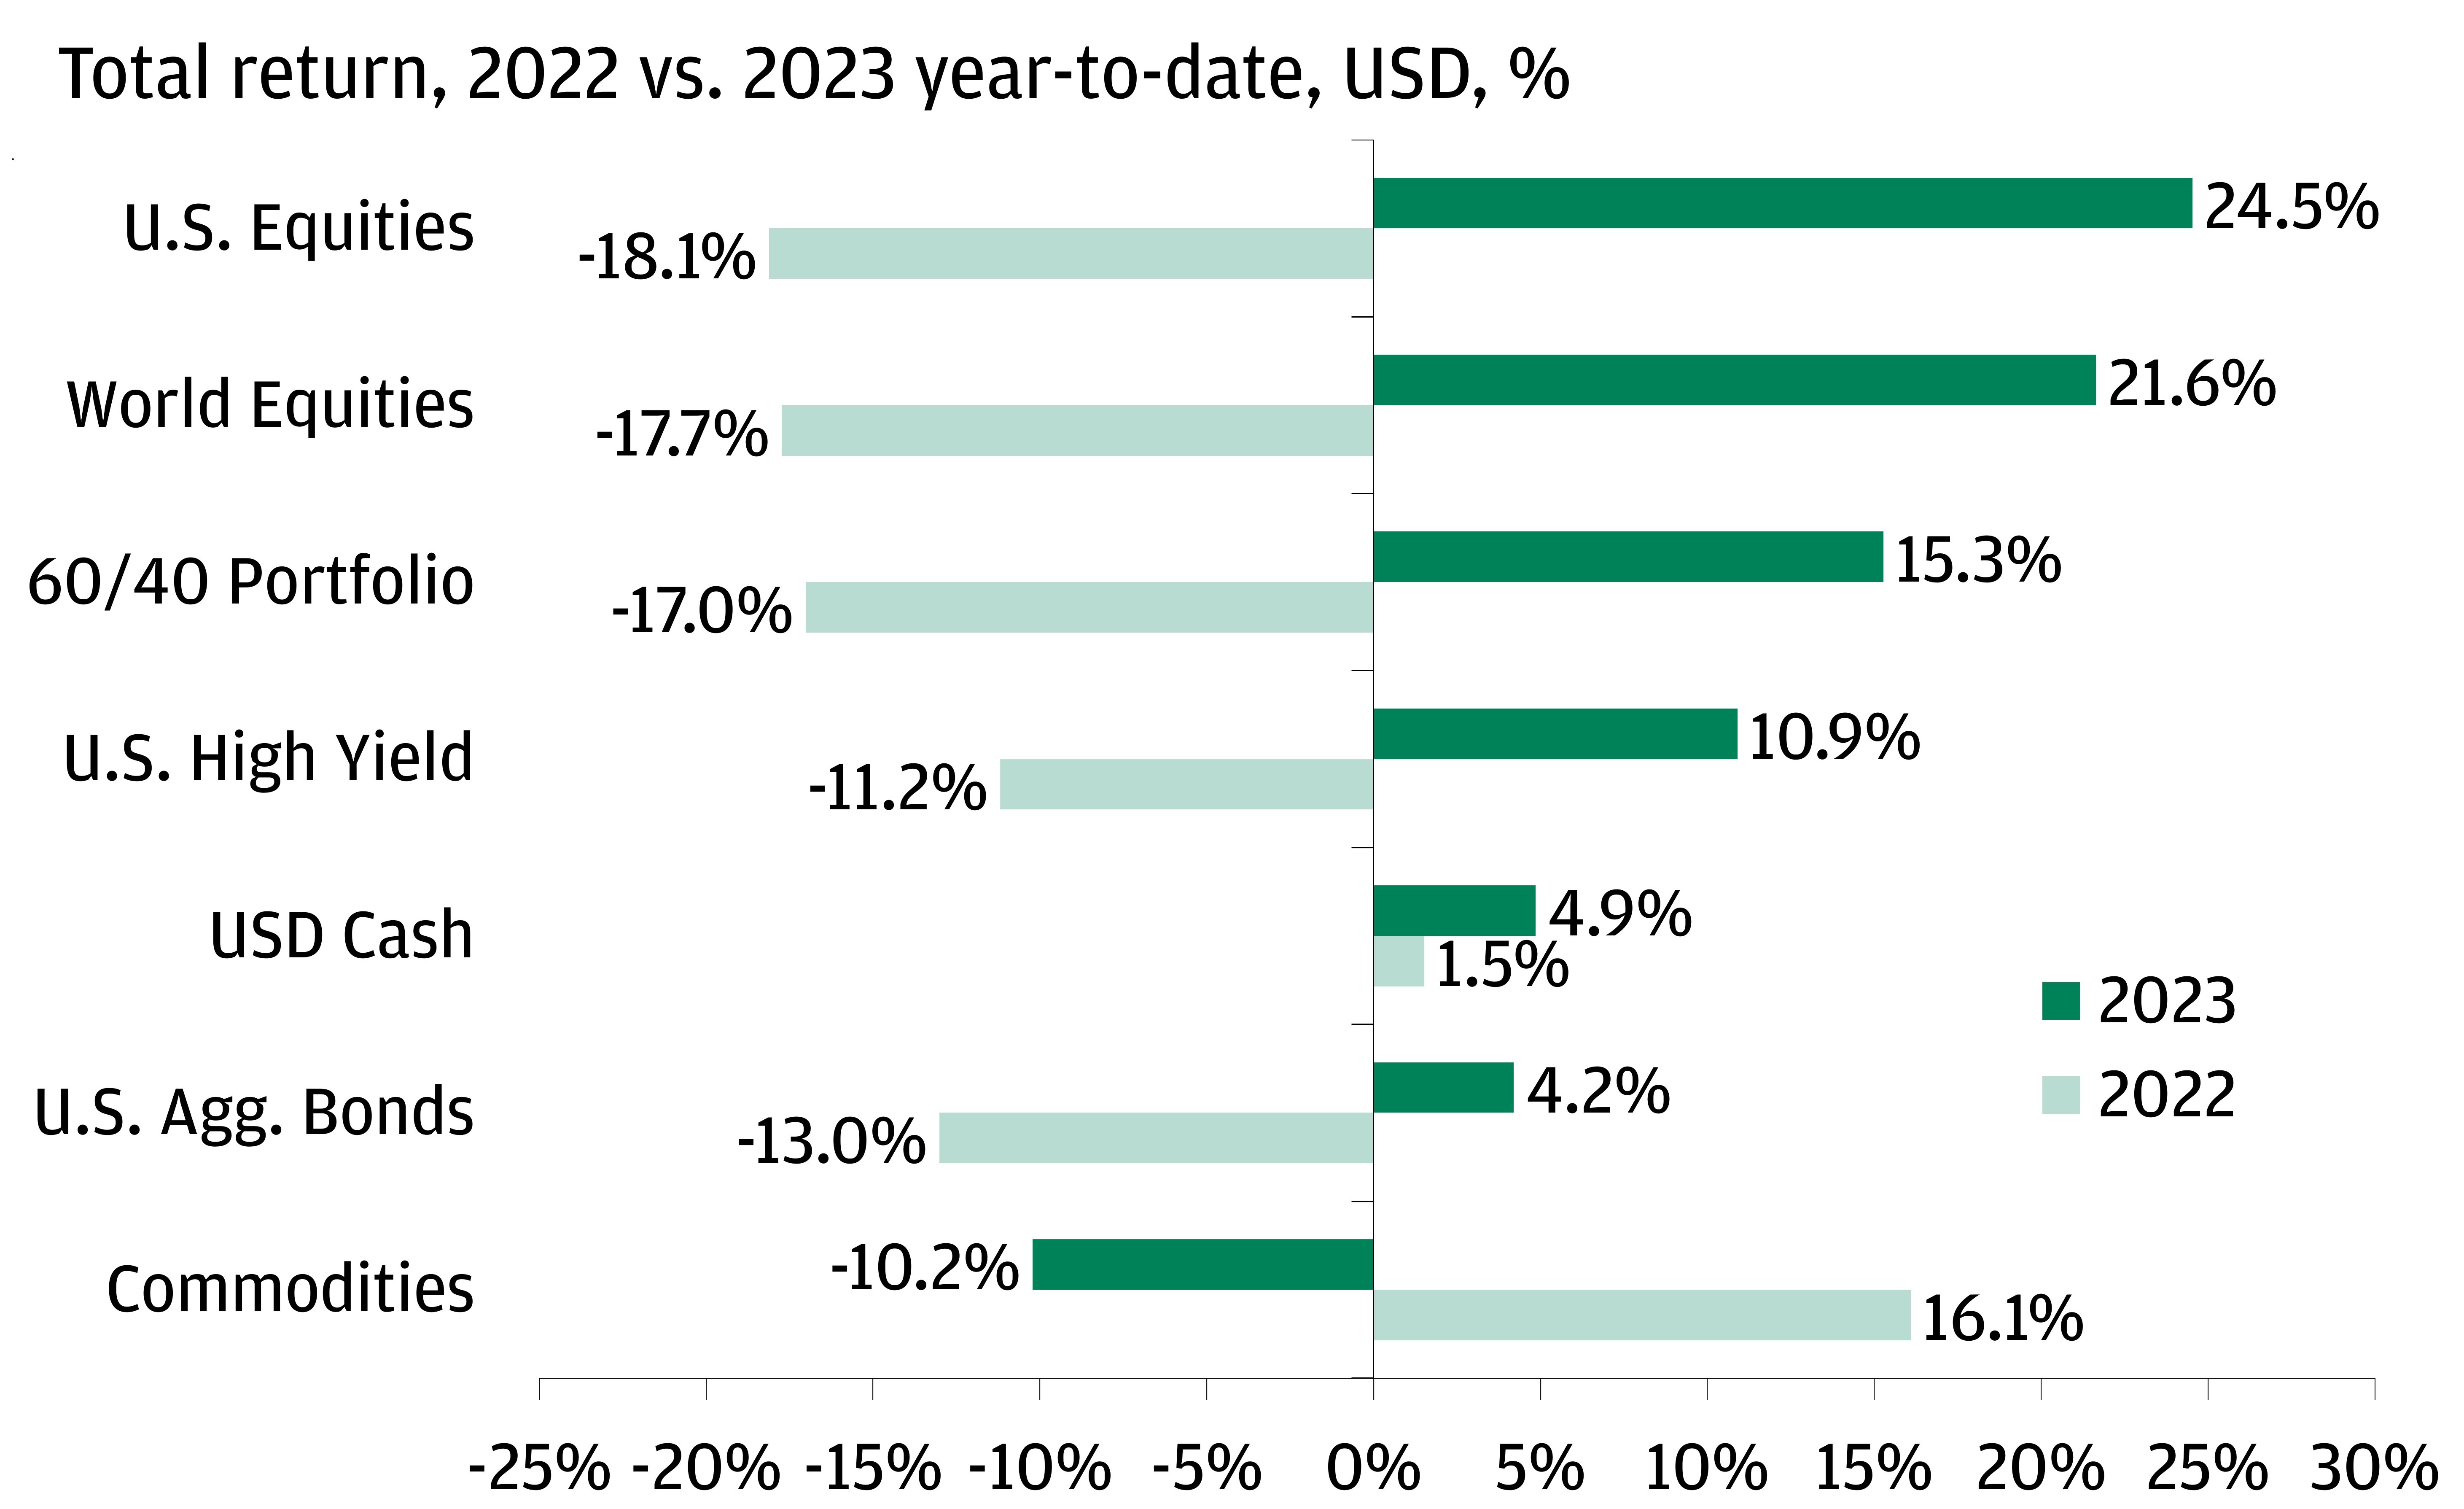 This chart shows returns in 2022 and 2023 YTD, across asset classes. 